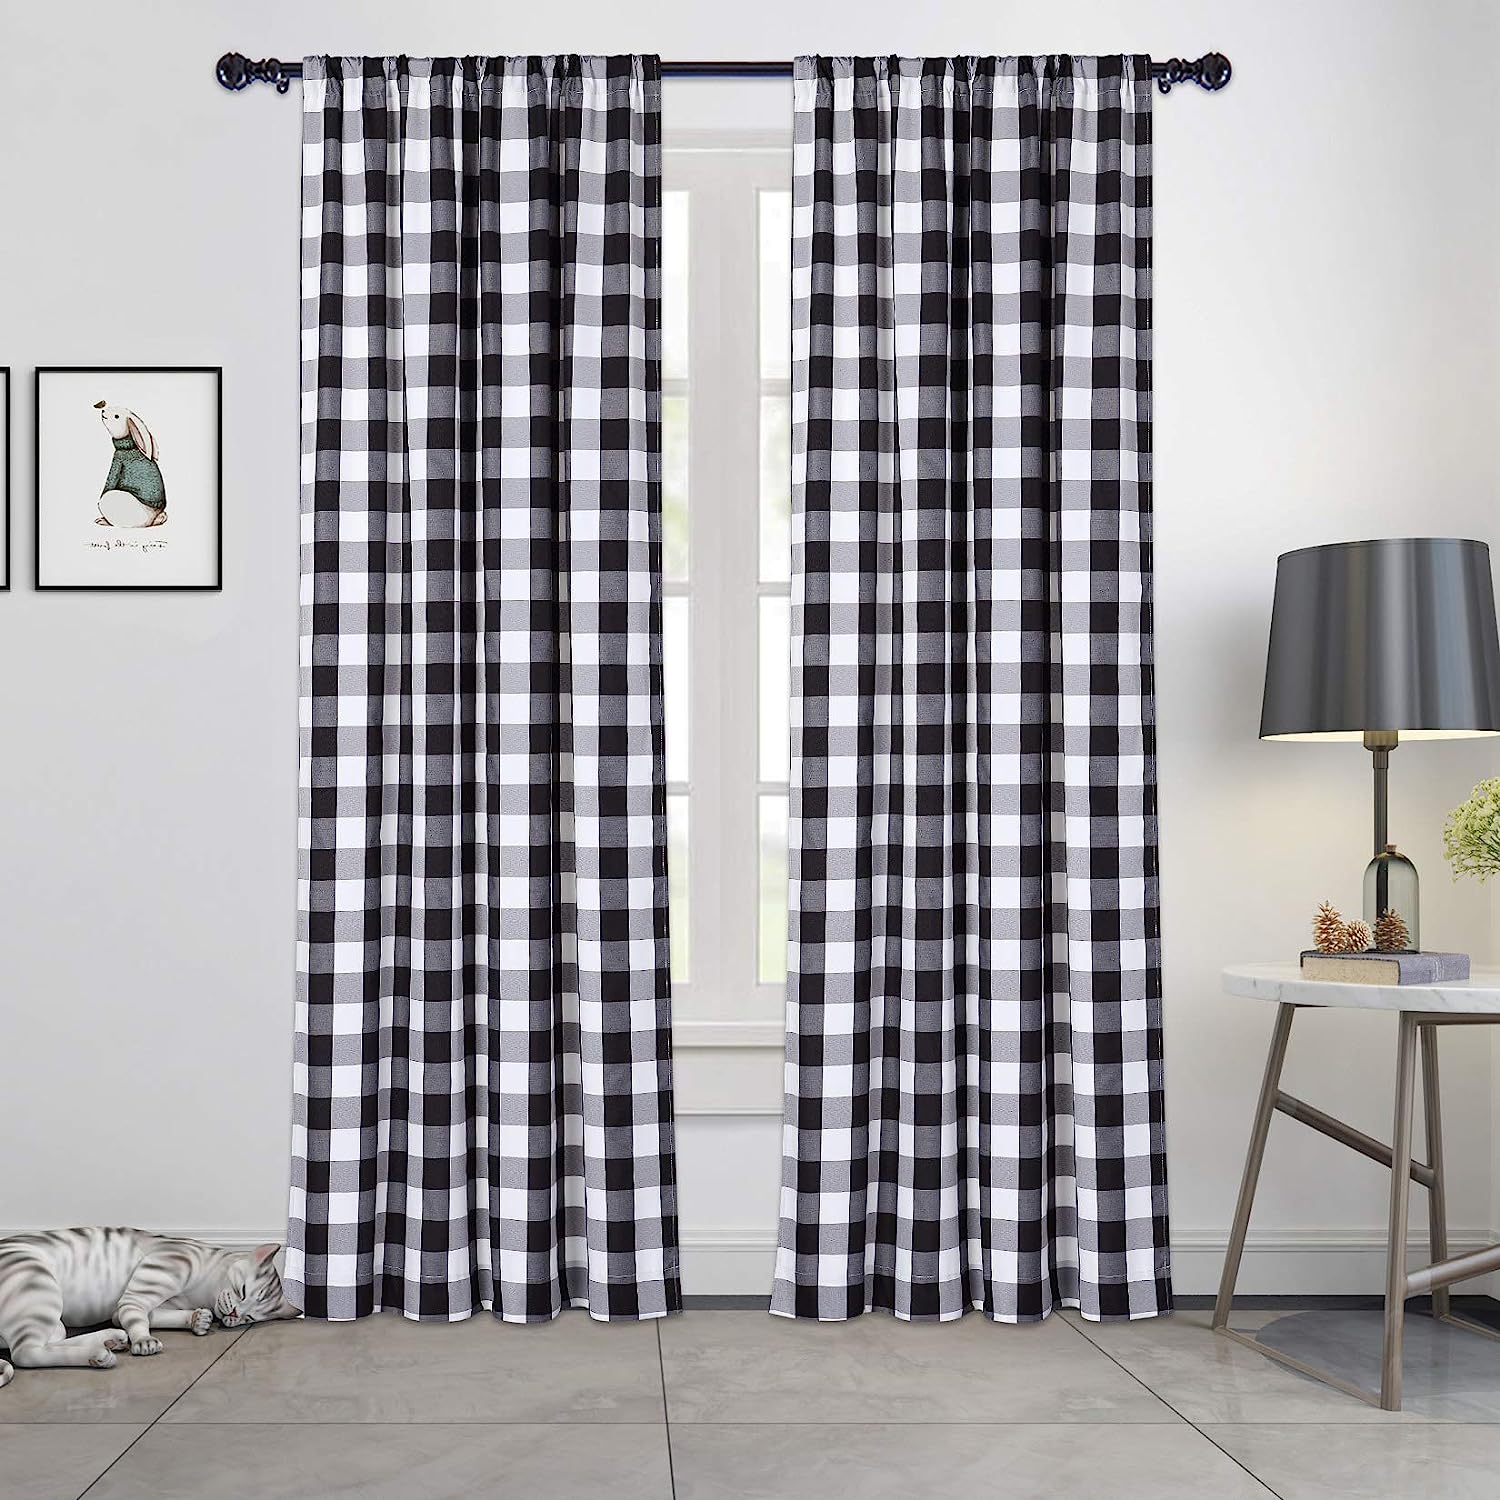 Curtains in Gingham Patterns